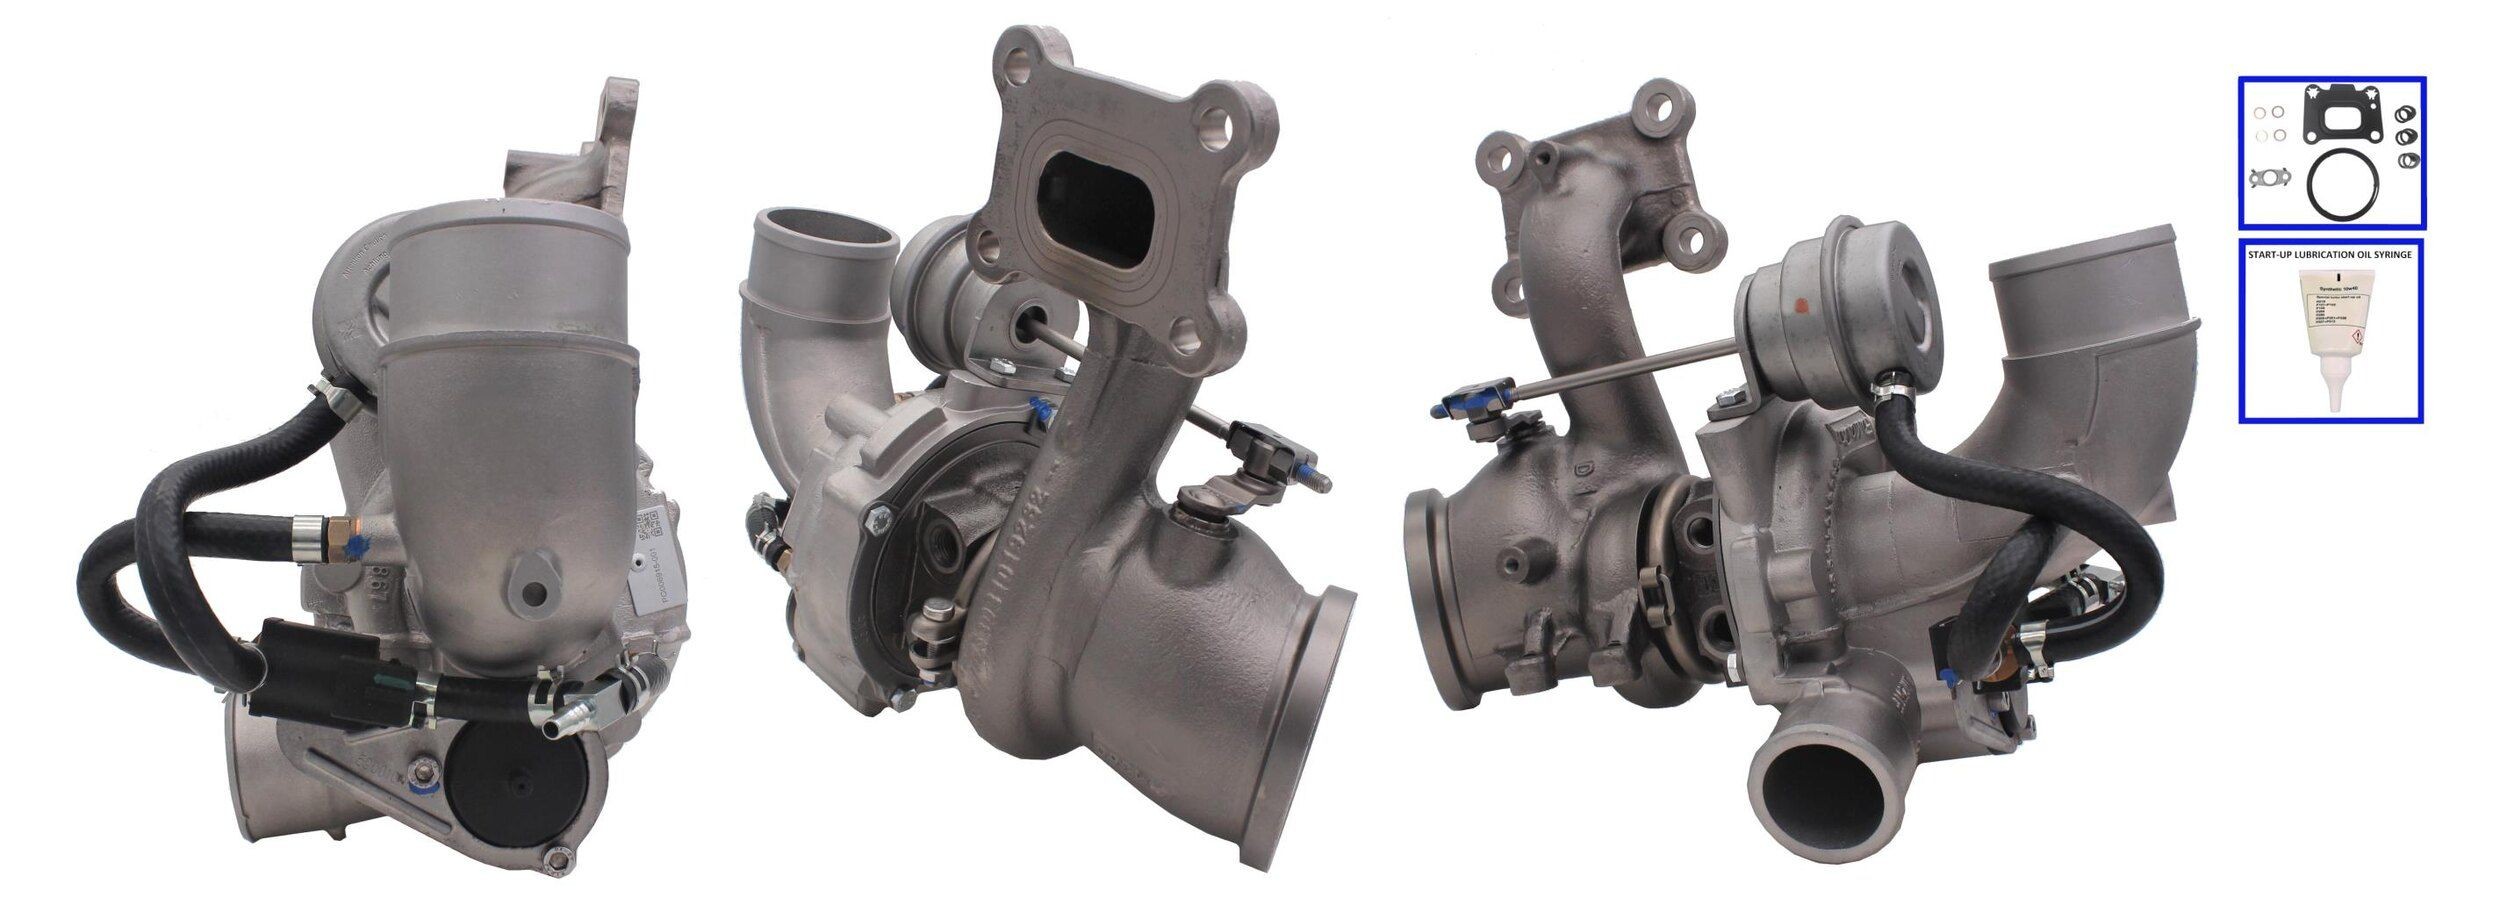 ELSTOCK 911111 Turbocharger Ford S Max mk2 2.0 EcoBoost 240 hp Petrol 2017 price